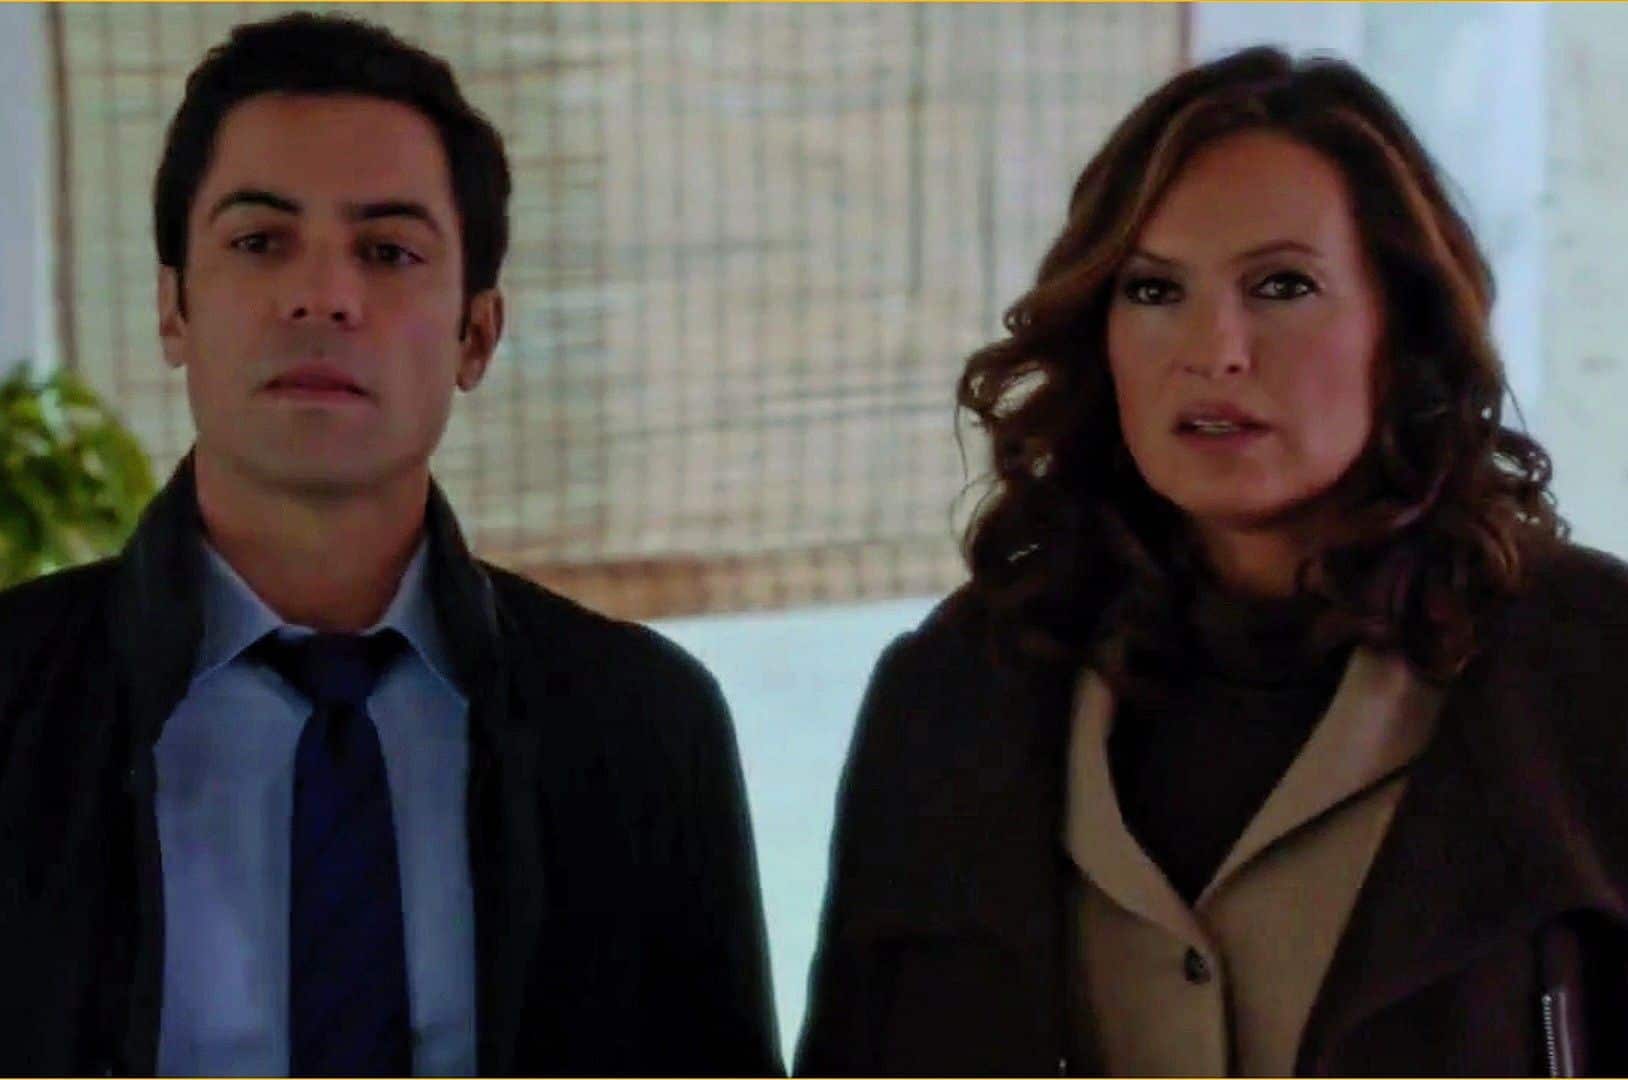 Who Does Olivia Benson End Up With?